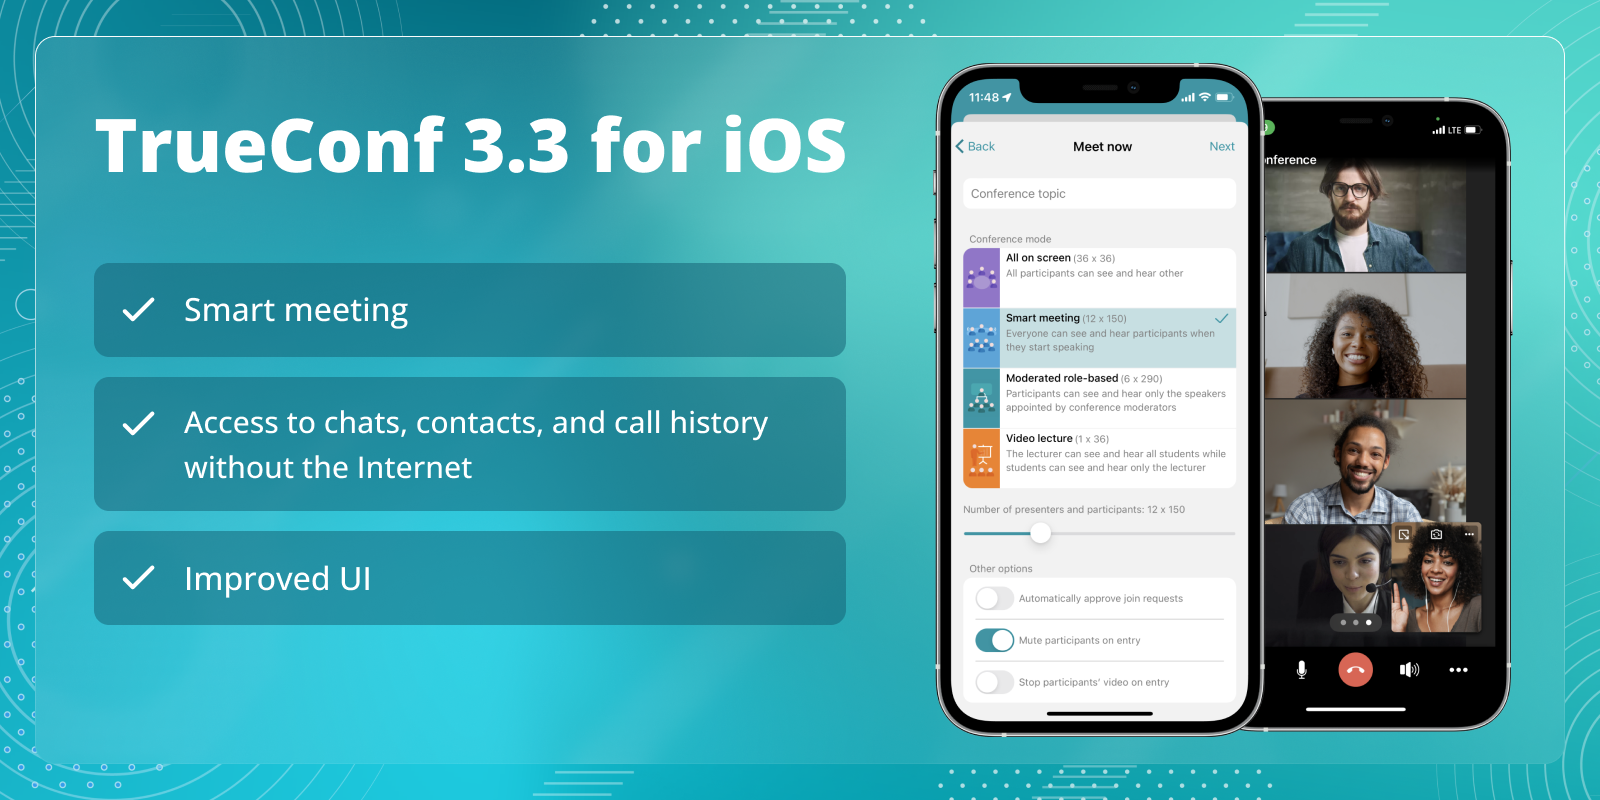 TrueConf 3.3 for iOS: new UI, Smart meeting mode, offline access to chats, contacts, and call history 1